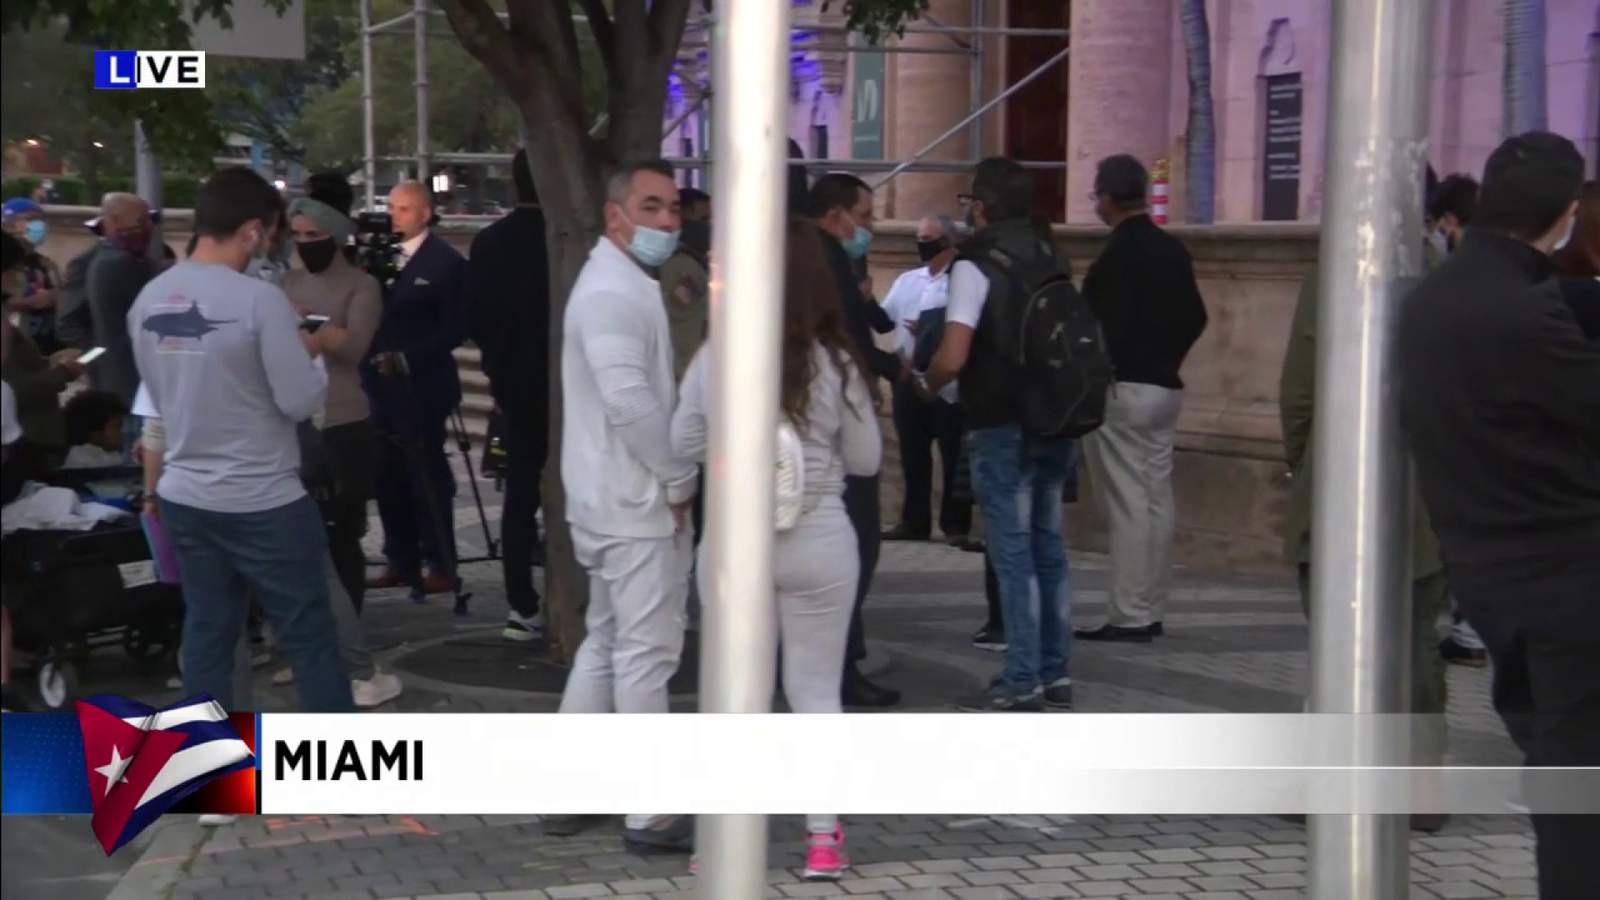 Activists mark Human Rights Day in solidarity with Cuban dissidents at Miami’s Freedom Tower